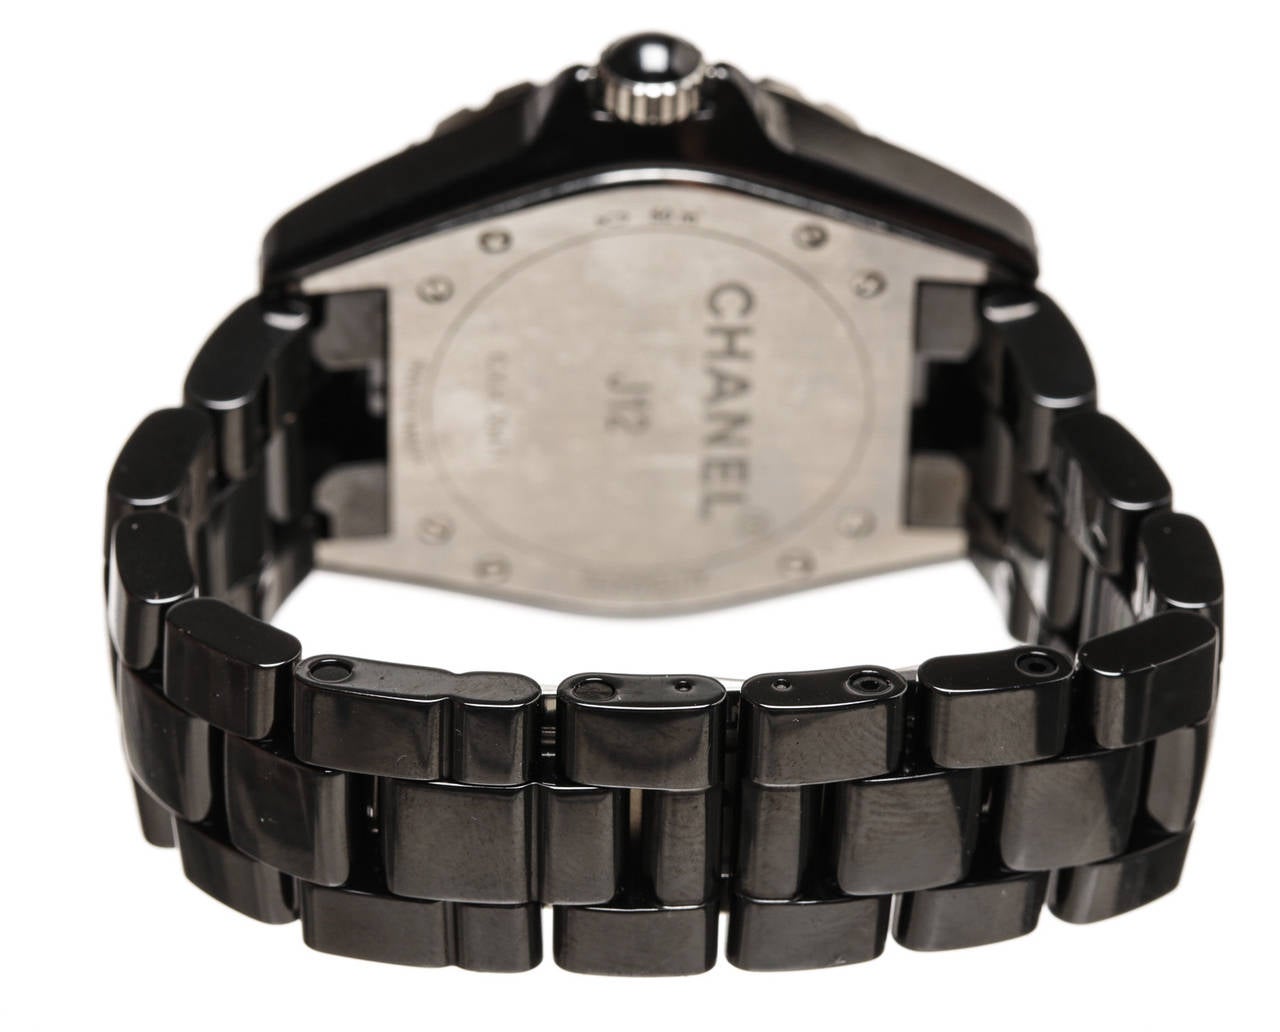 This stunning Chanel black ceramic J12 33mm watch combines classic style with class. Crafted from high-gloss high tech black ceramic, this watch has a black face with white Arabic and diamond numeral hour markers. The ceramic finish is extremely